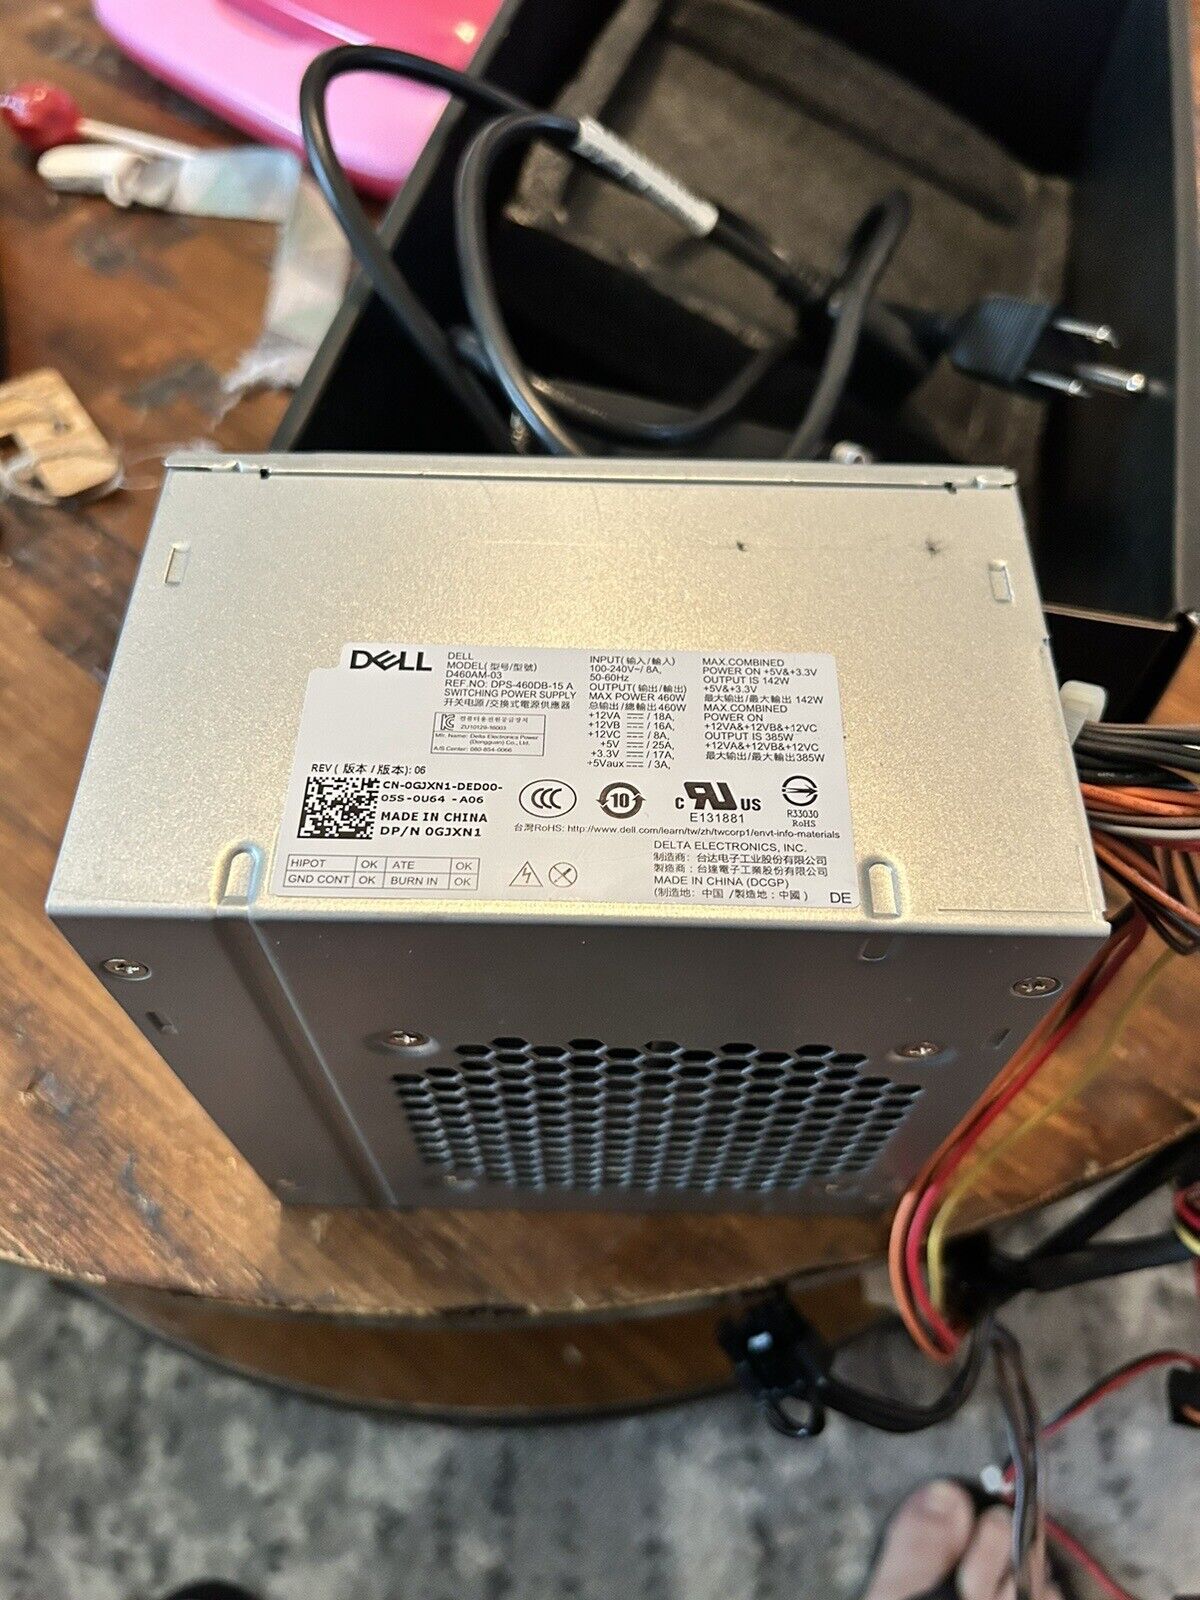 Dell DM1RW 460W 6+2 Pin Power Supply And Stock Fan, Power Cable, And Extra Chord